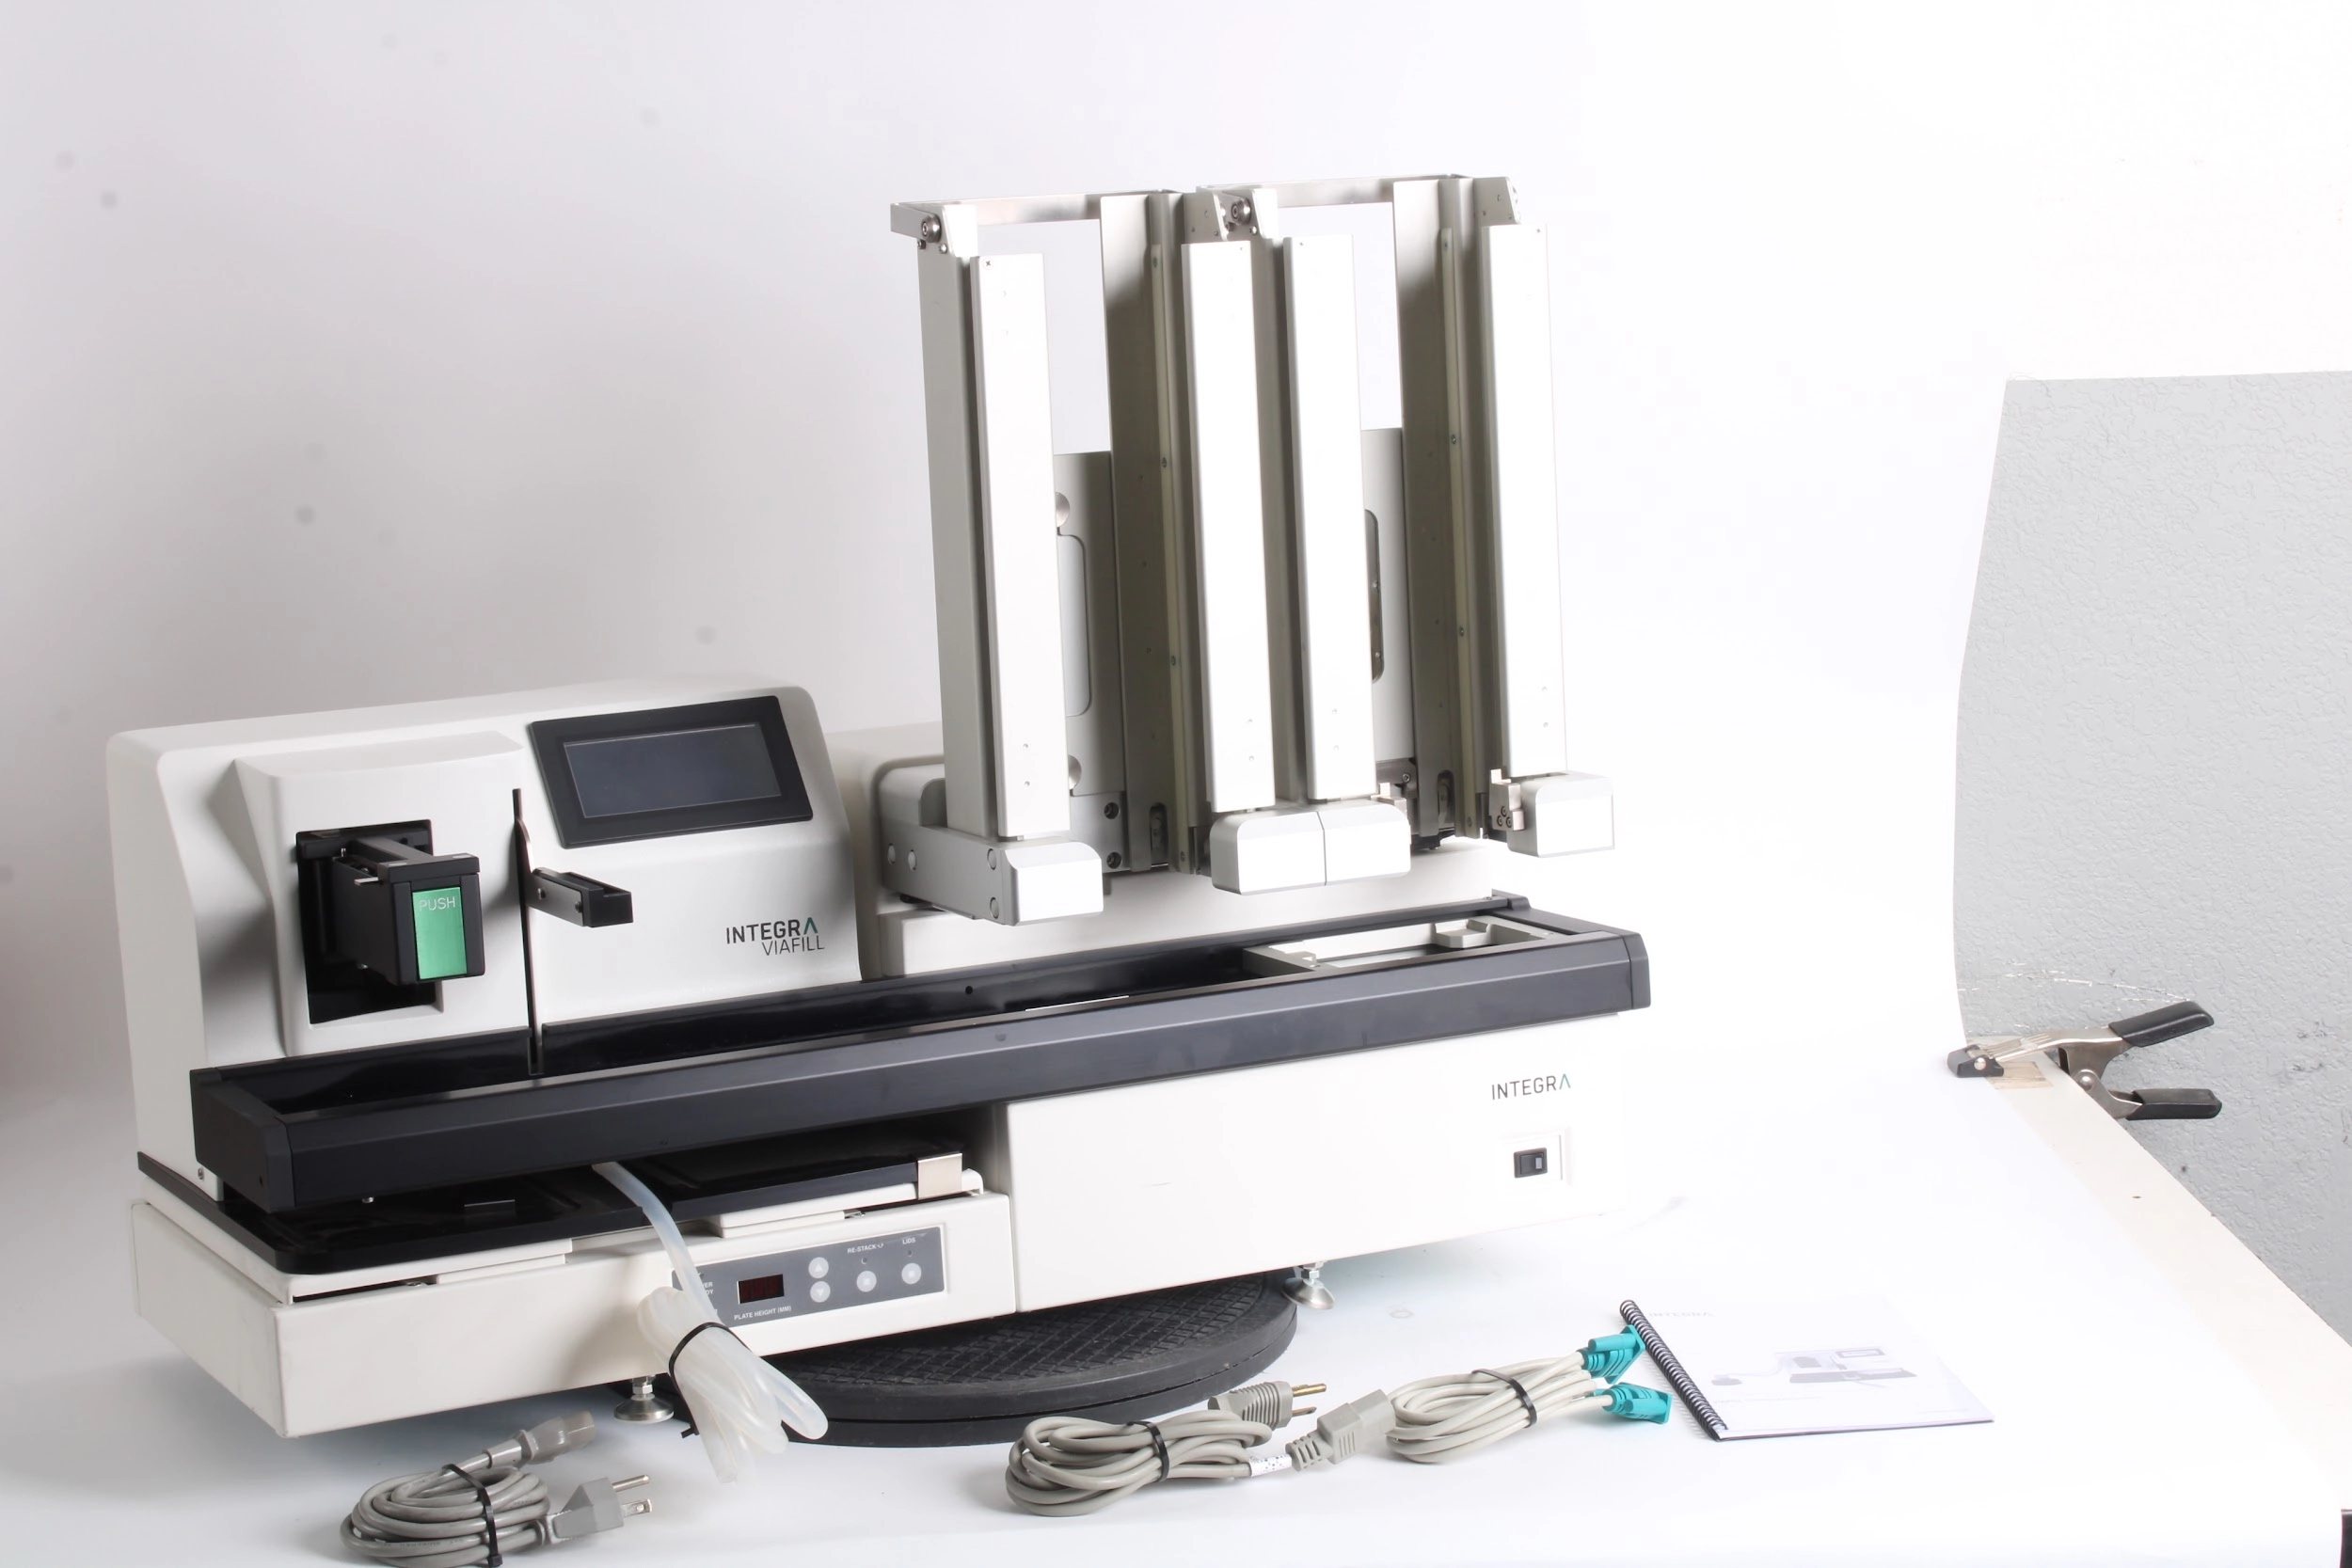 Integra Viafill Rapid Reagent Dispenser With Viafill Stacker and Accessories